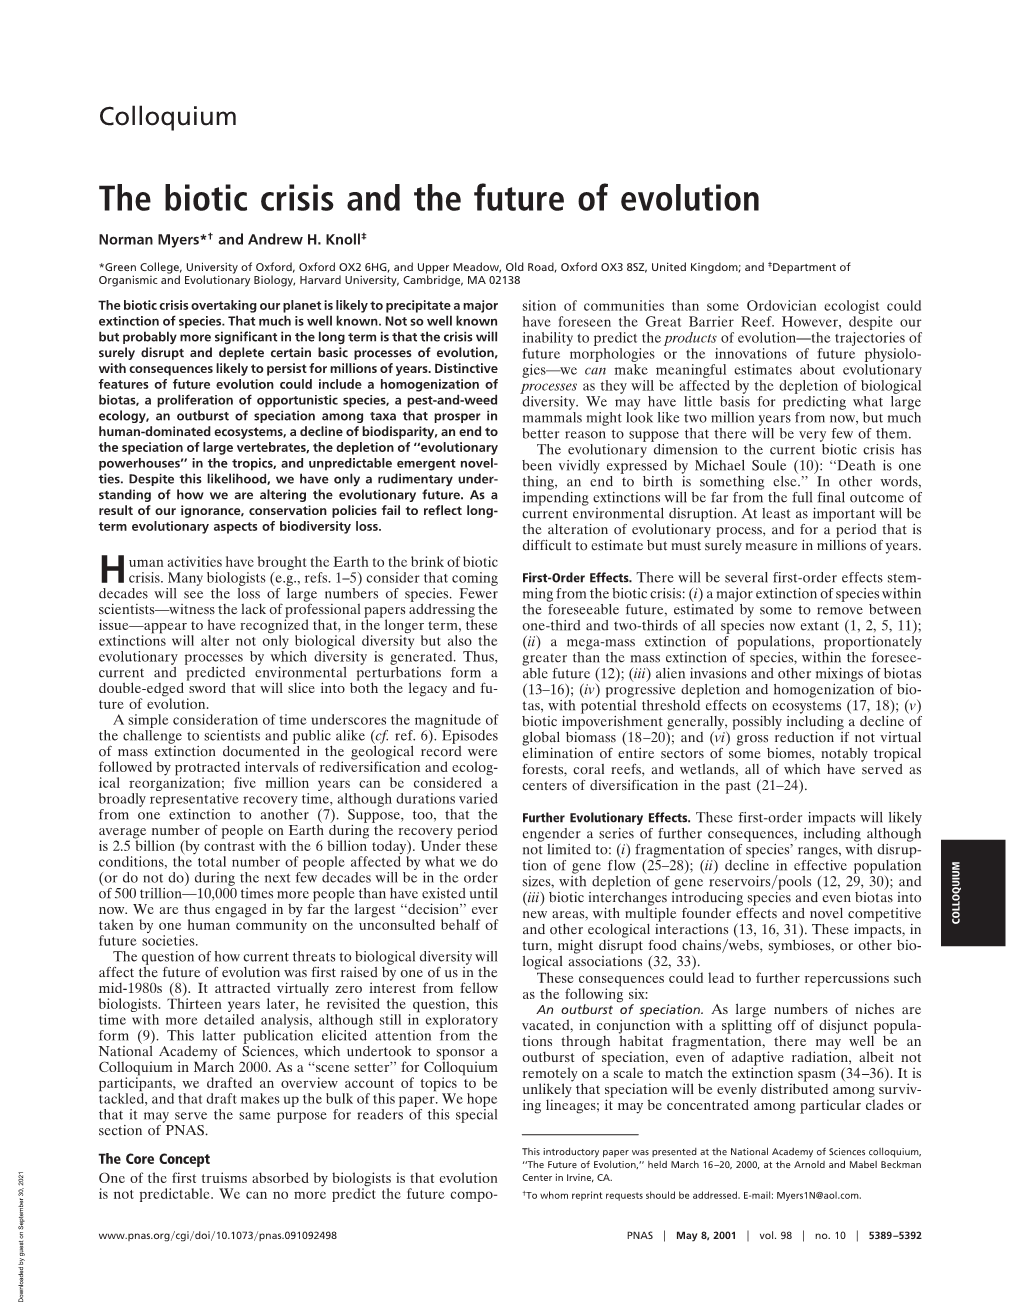 The Biotic Crisis and the Future of Evolution